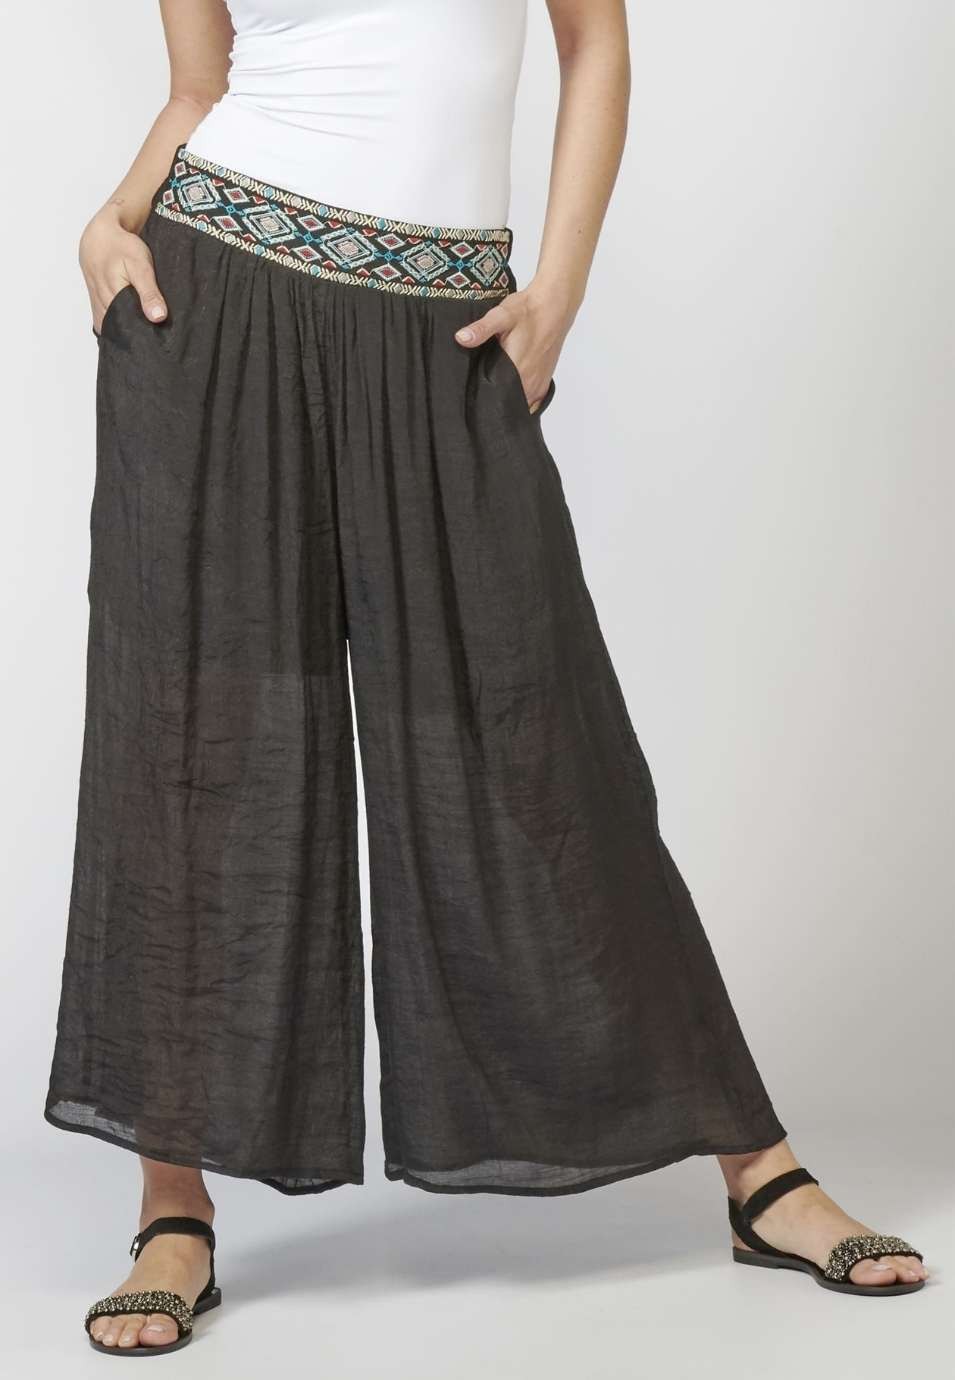 Women's long elastic trousers with sash and Ethnic Embroidered Detail in Black color 3